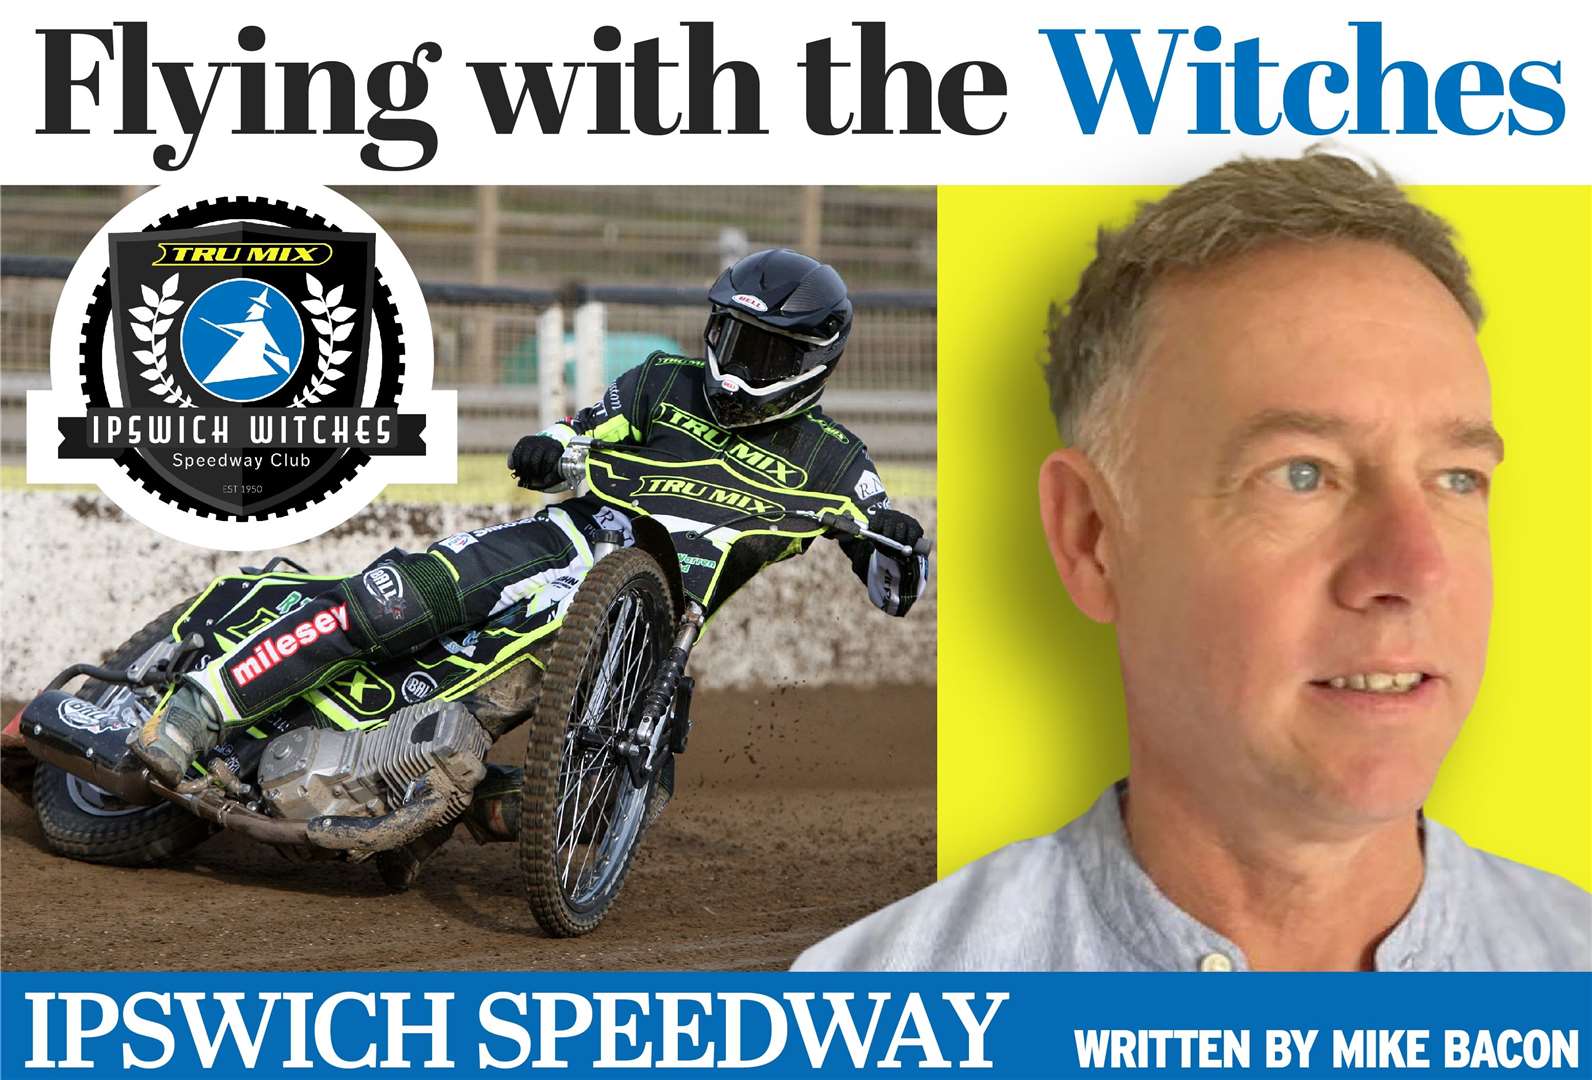 Flying with the Witches columnist Mike Bacon